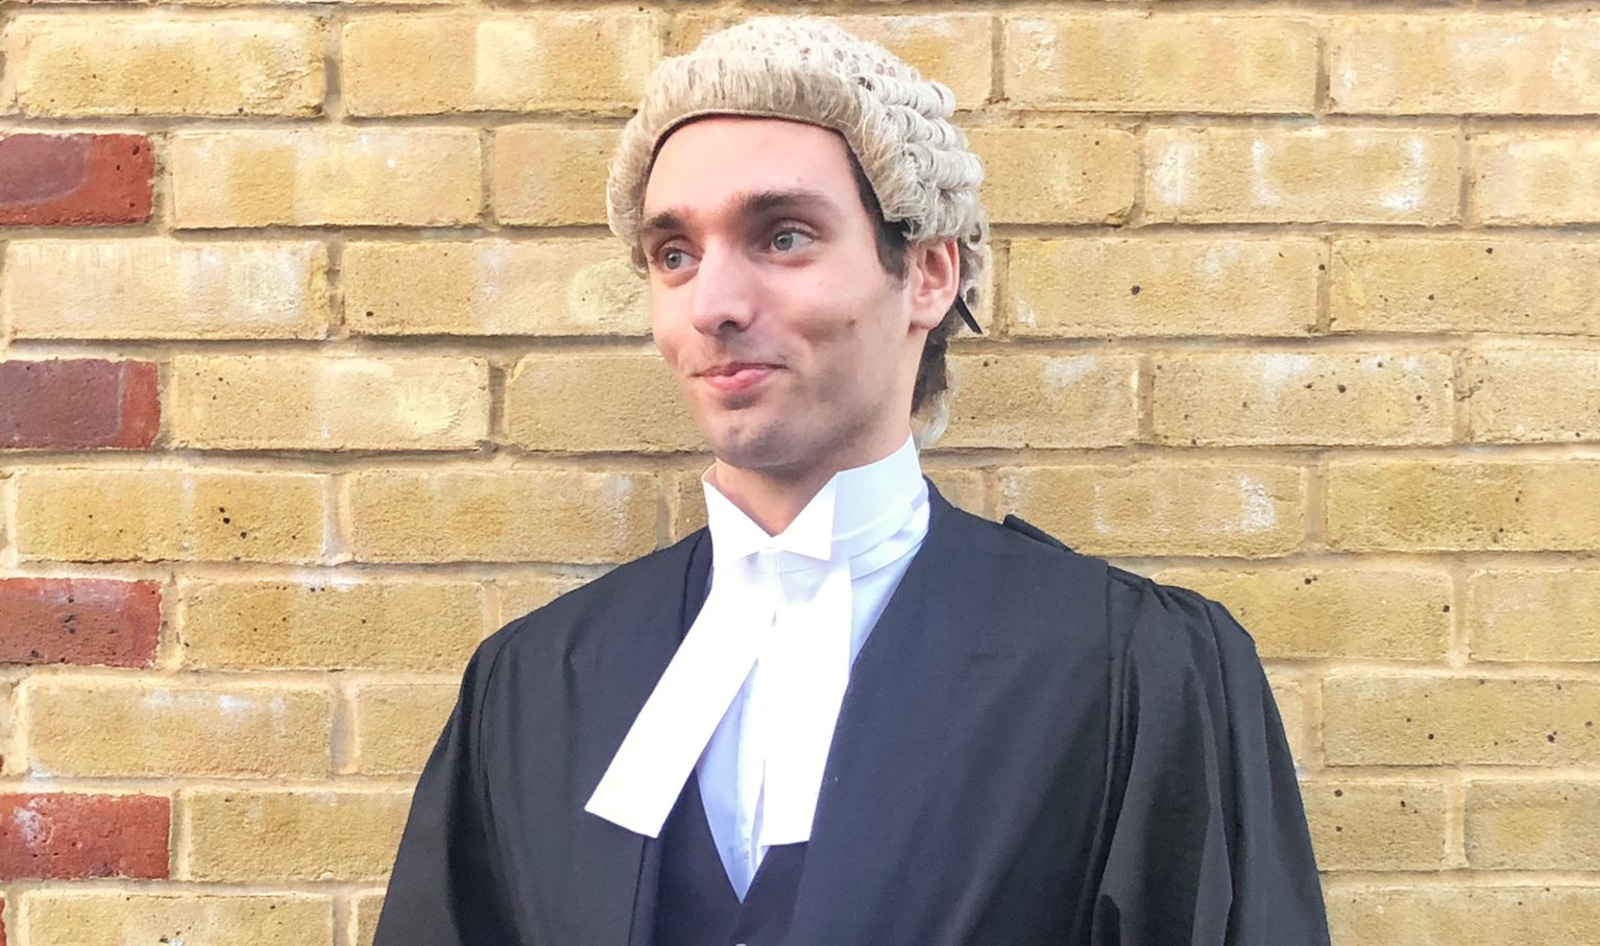 UK Barristers Now Have a Vegan Wig Option Made From Hemp Instead of Horse Hair